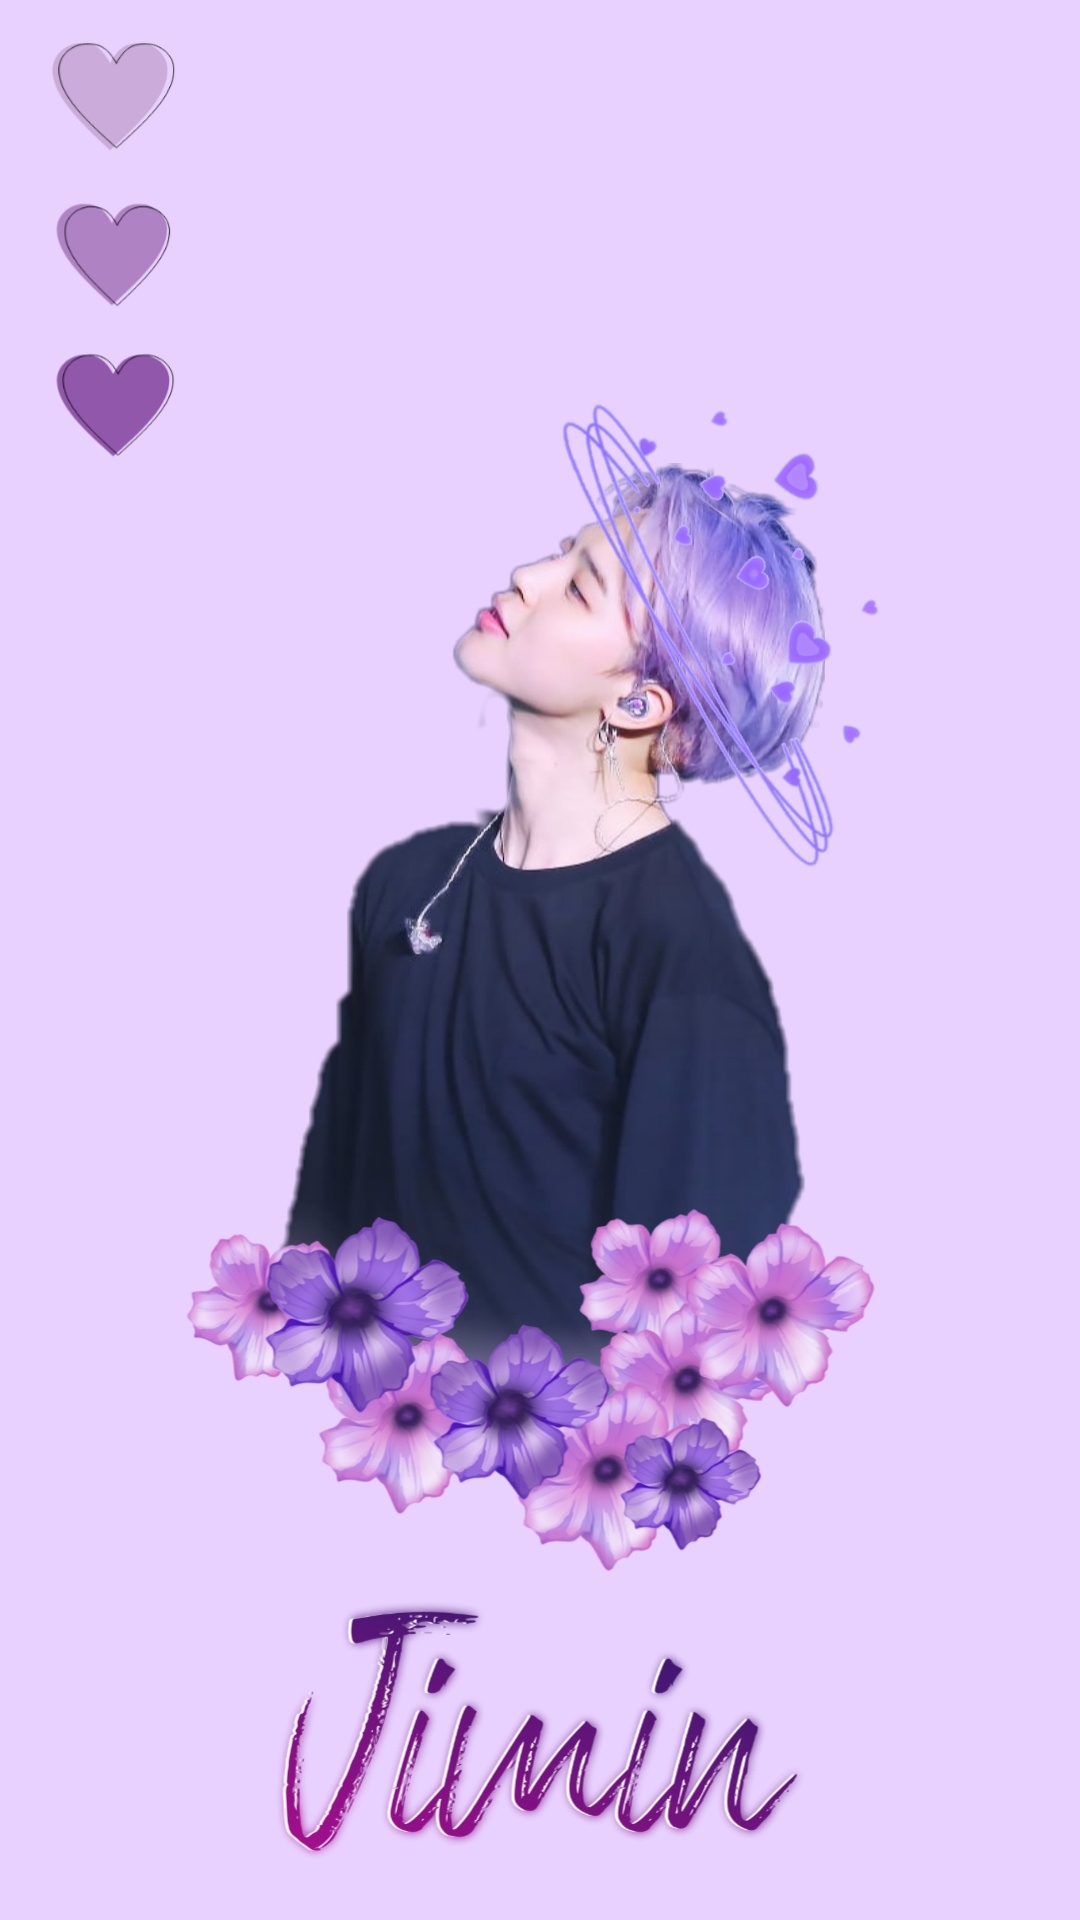 Bts jimin photo with flower Wallpaper Download